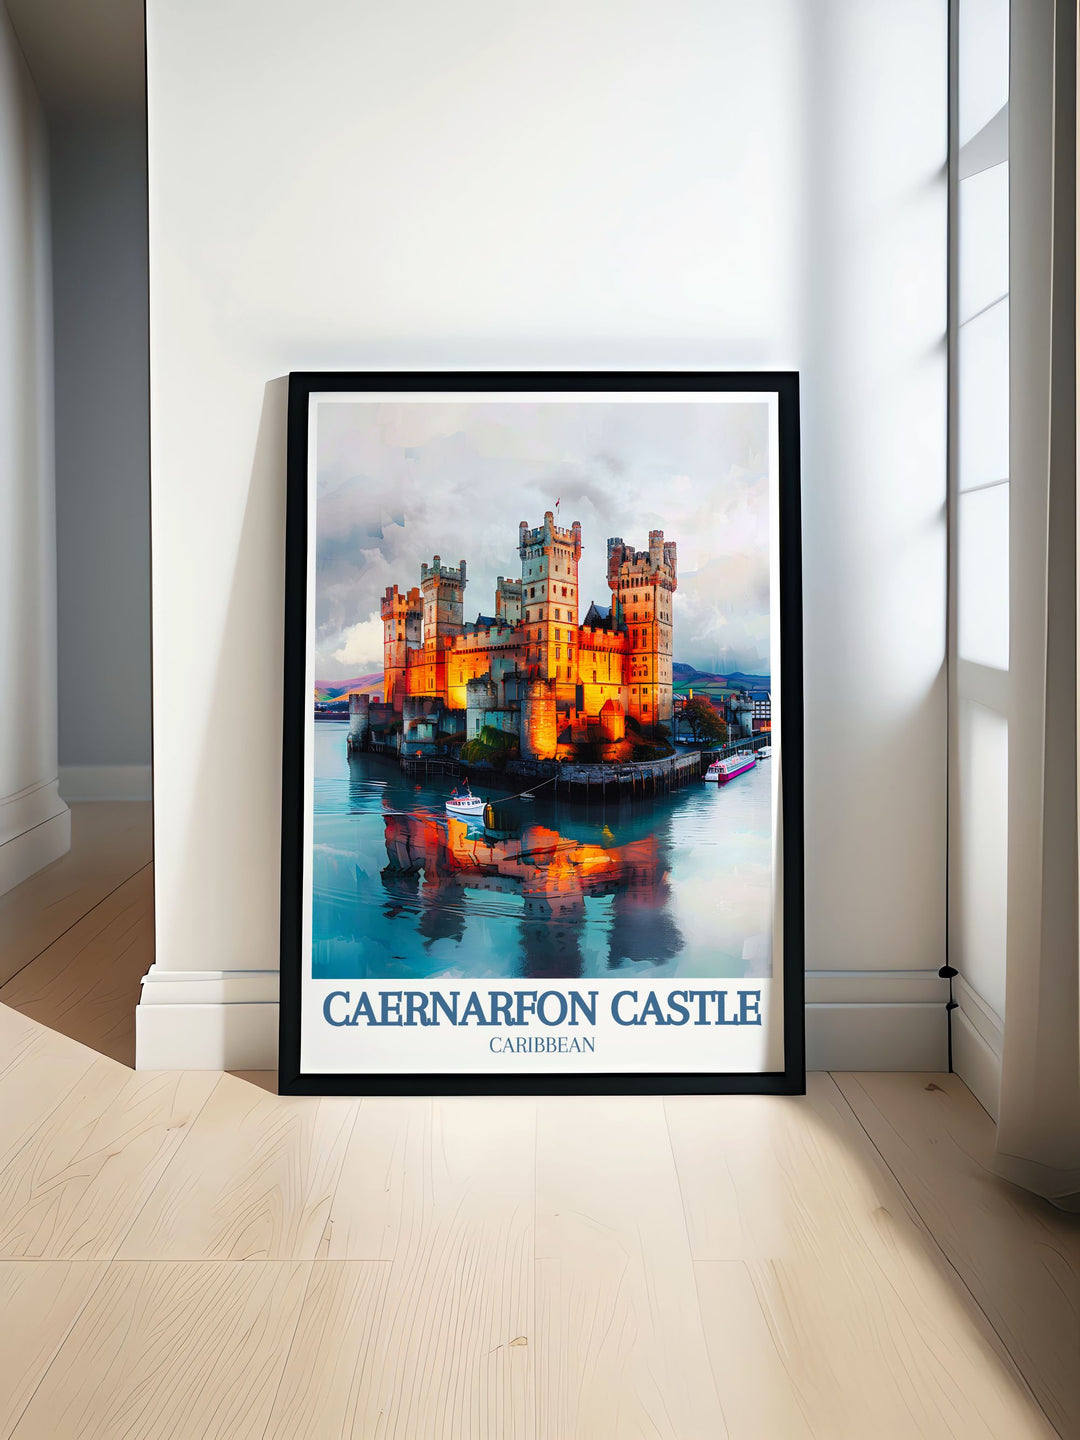 Captivating Caernarfon Castle poster featuring the picturesque Beddgelert Village and the stunning Snowdon Ranger, showcasing the beauty and history of Wales. Perfect for adding a touch of Welsh charm to your home decor.